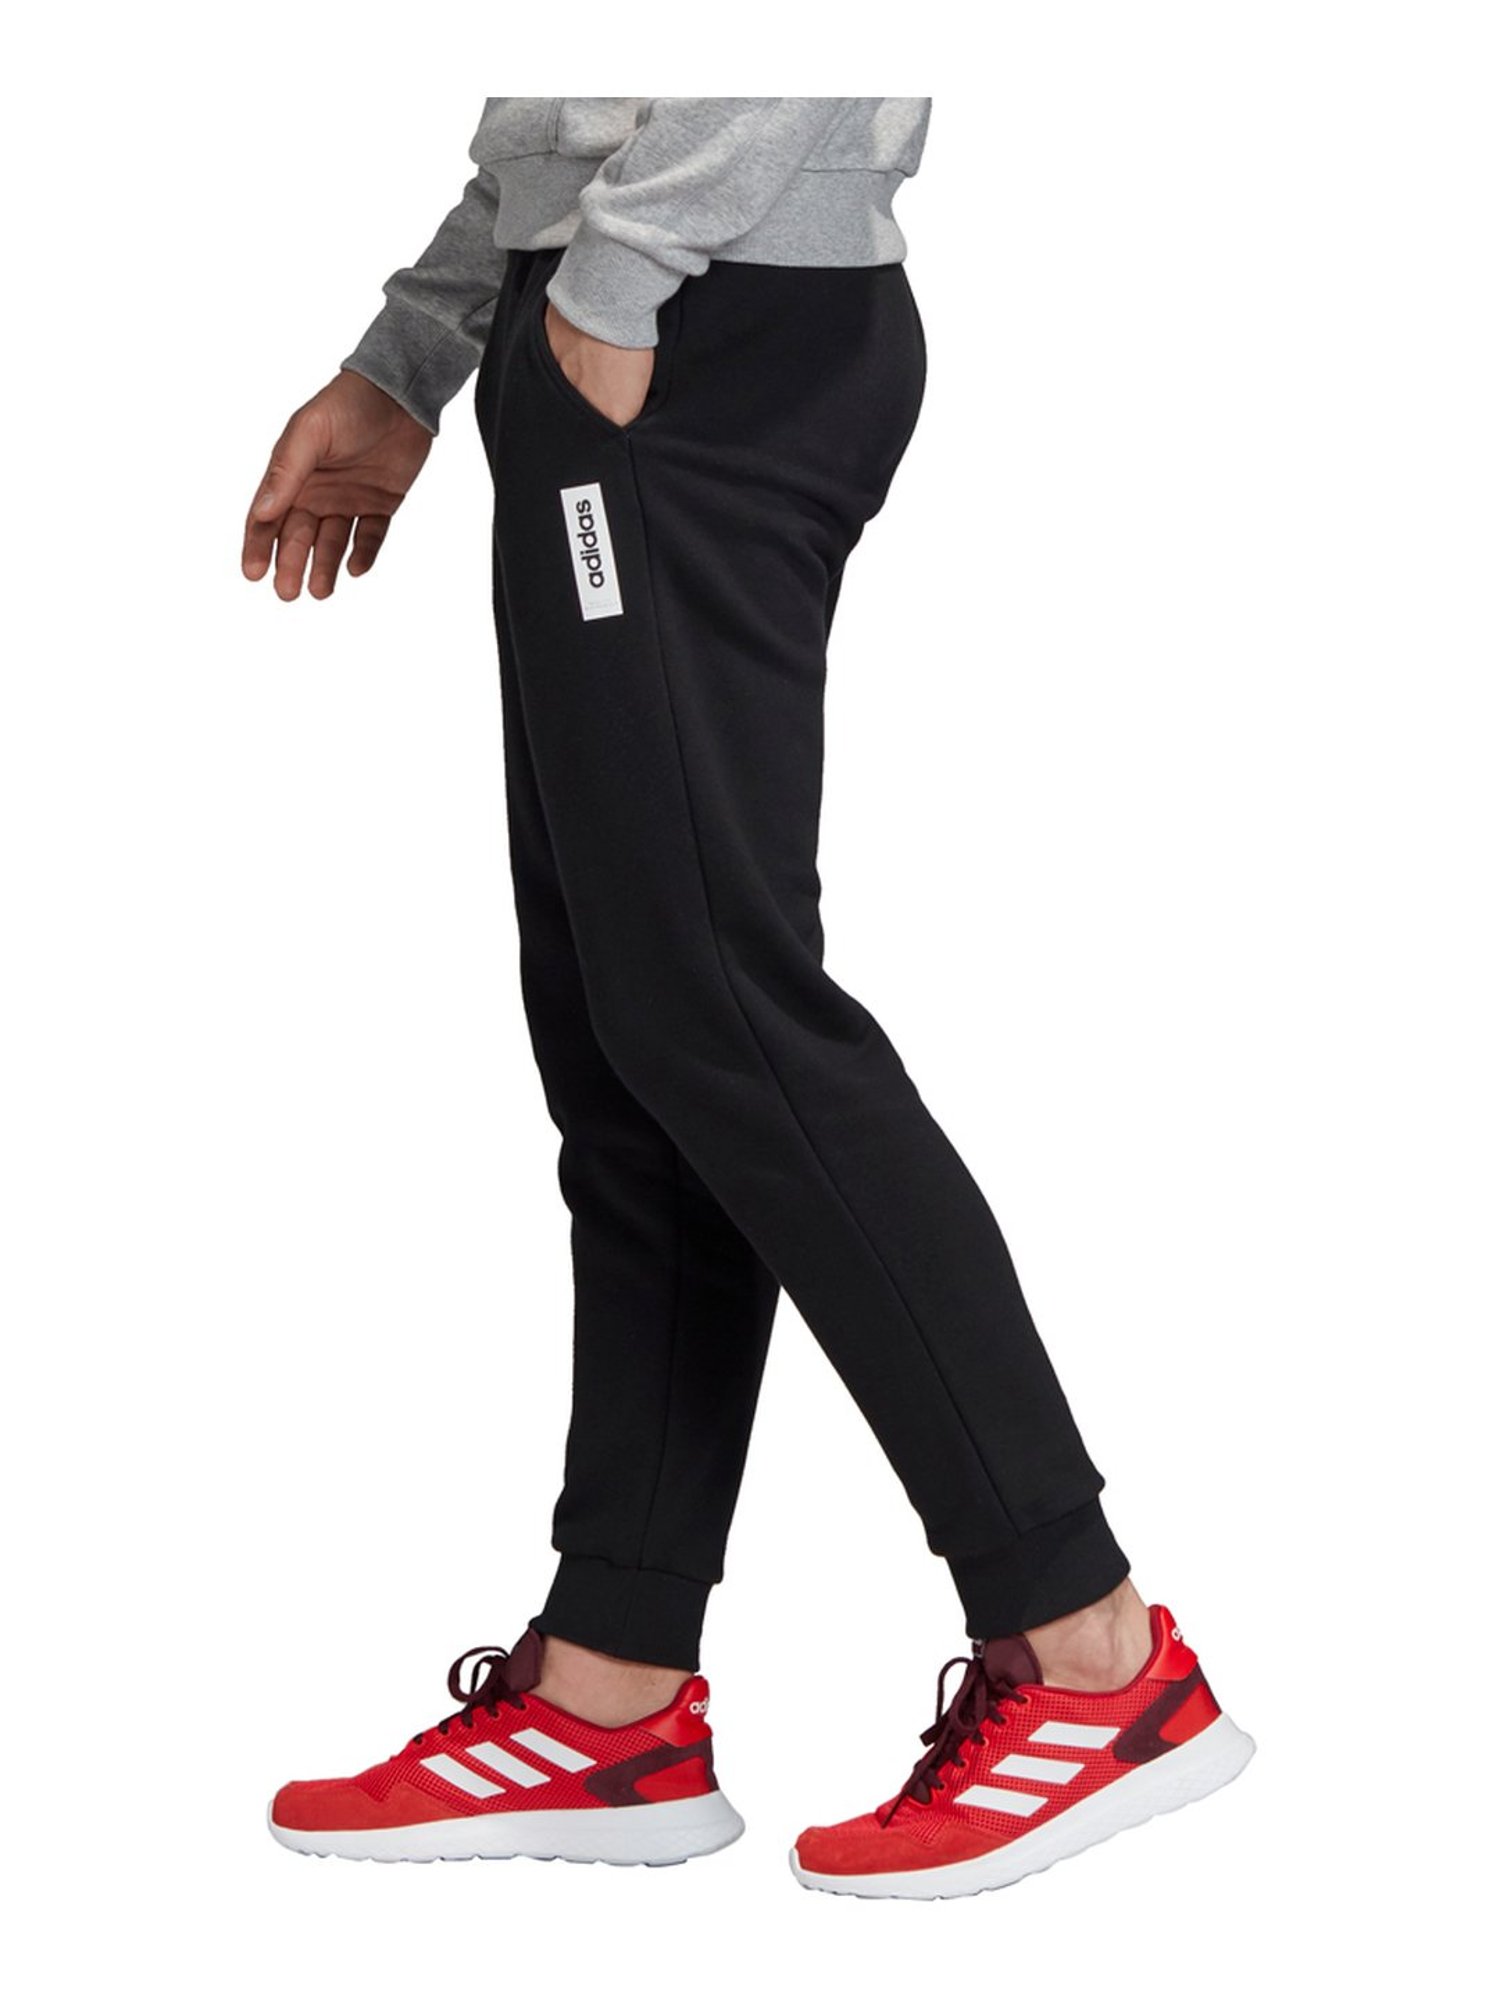 Buy Adidas Black Slim Fit Joggers for 